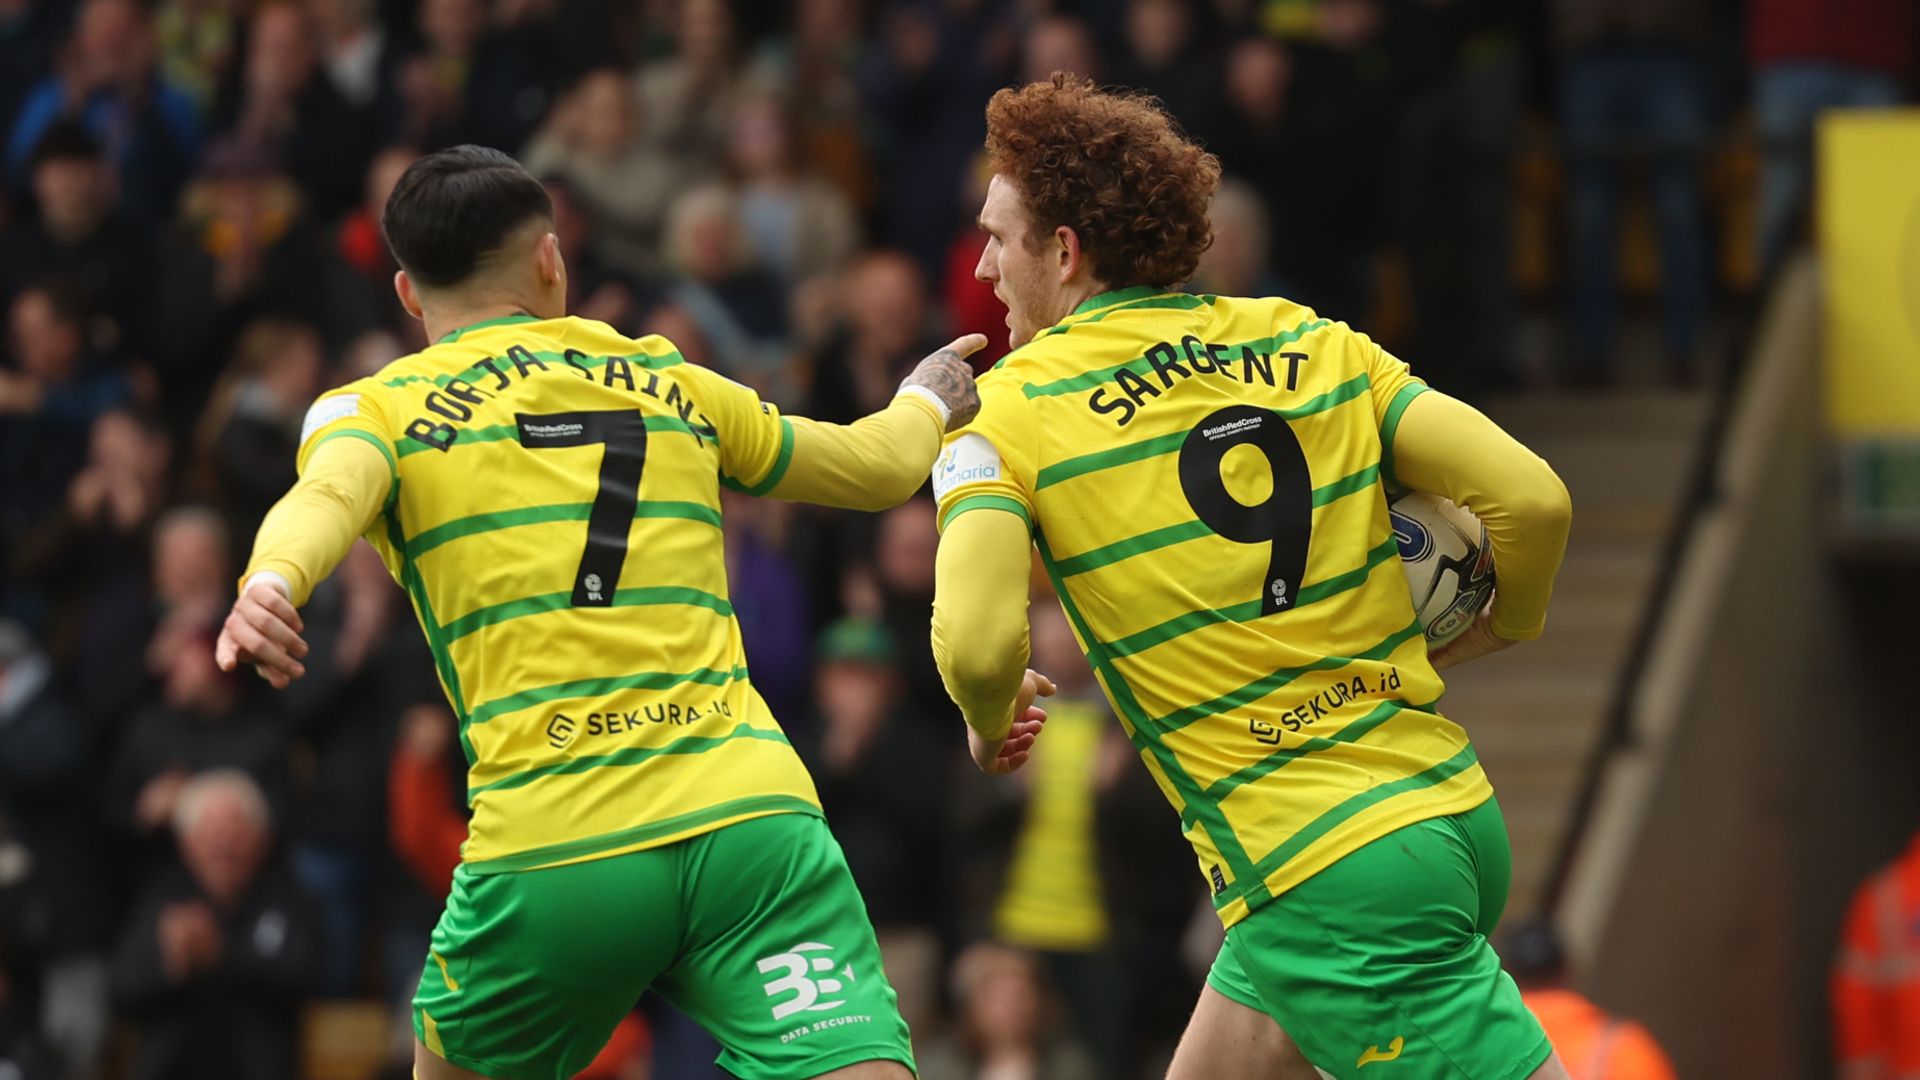 Norwich come from behind to edge closer to play-off spot